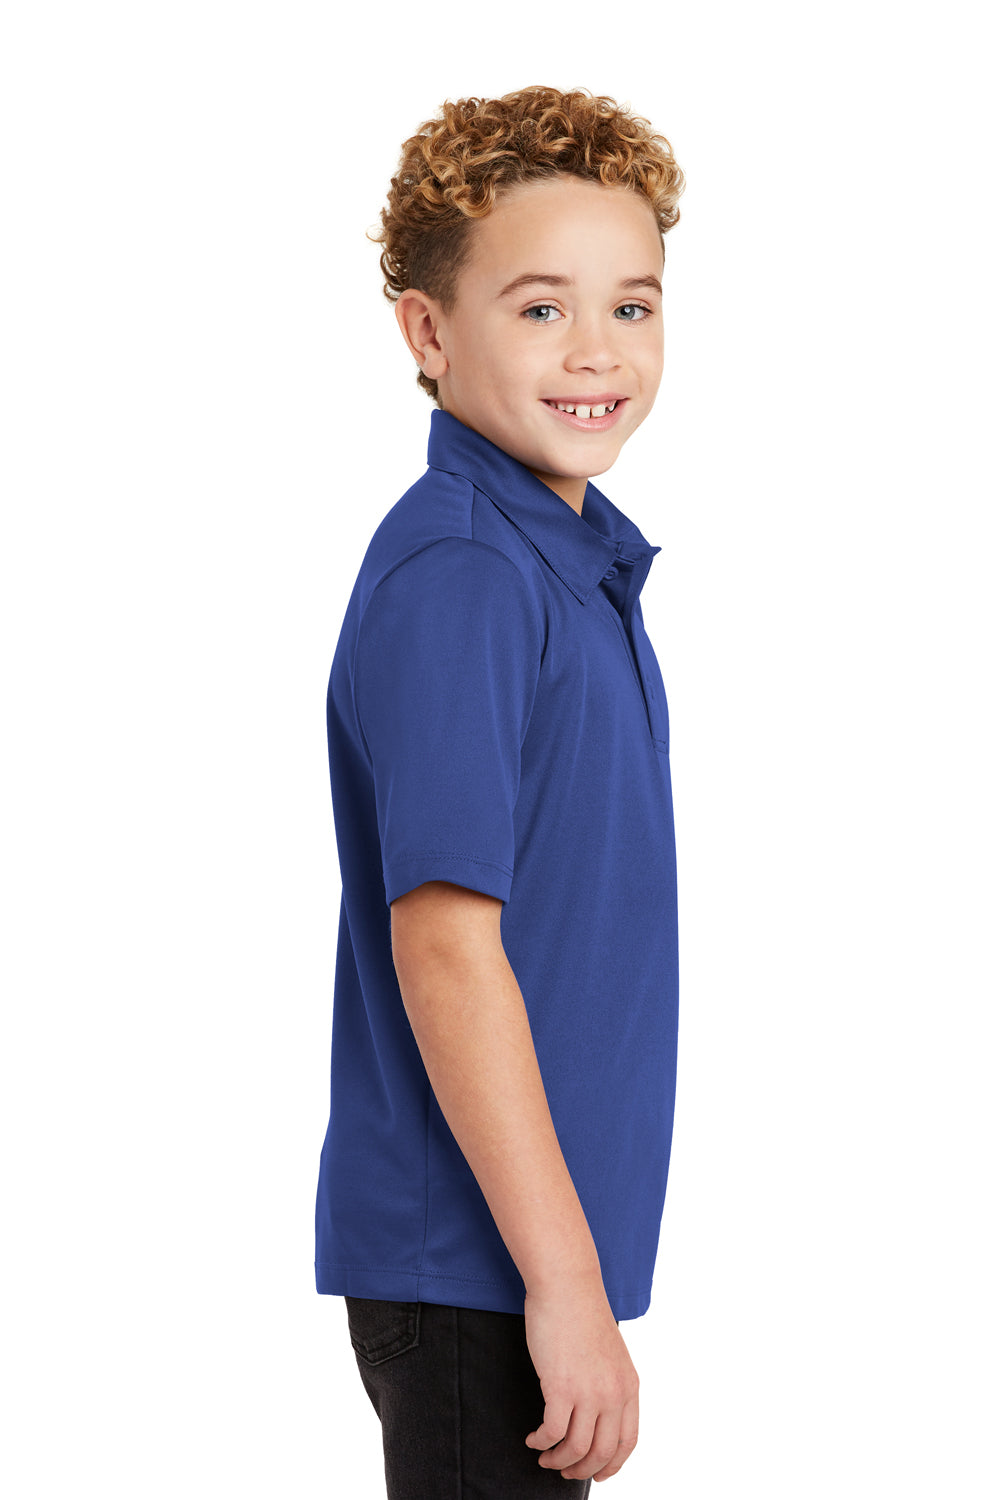 Port Authority Y540 Youth Silk Touch Performance Moisture Wicking Short Sleeve Polo Shirt Royal Blue Side